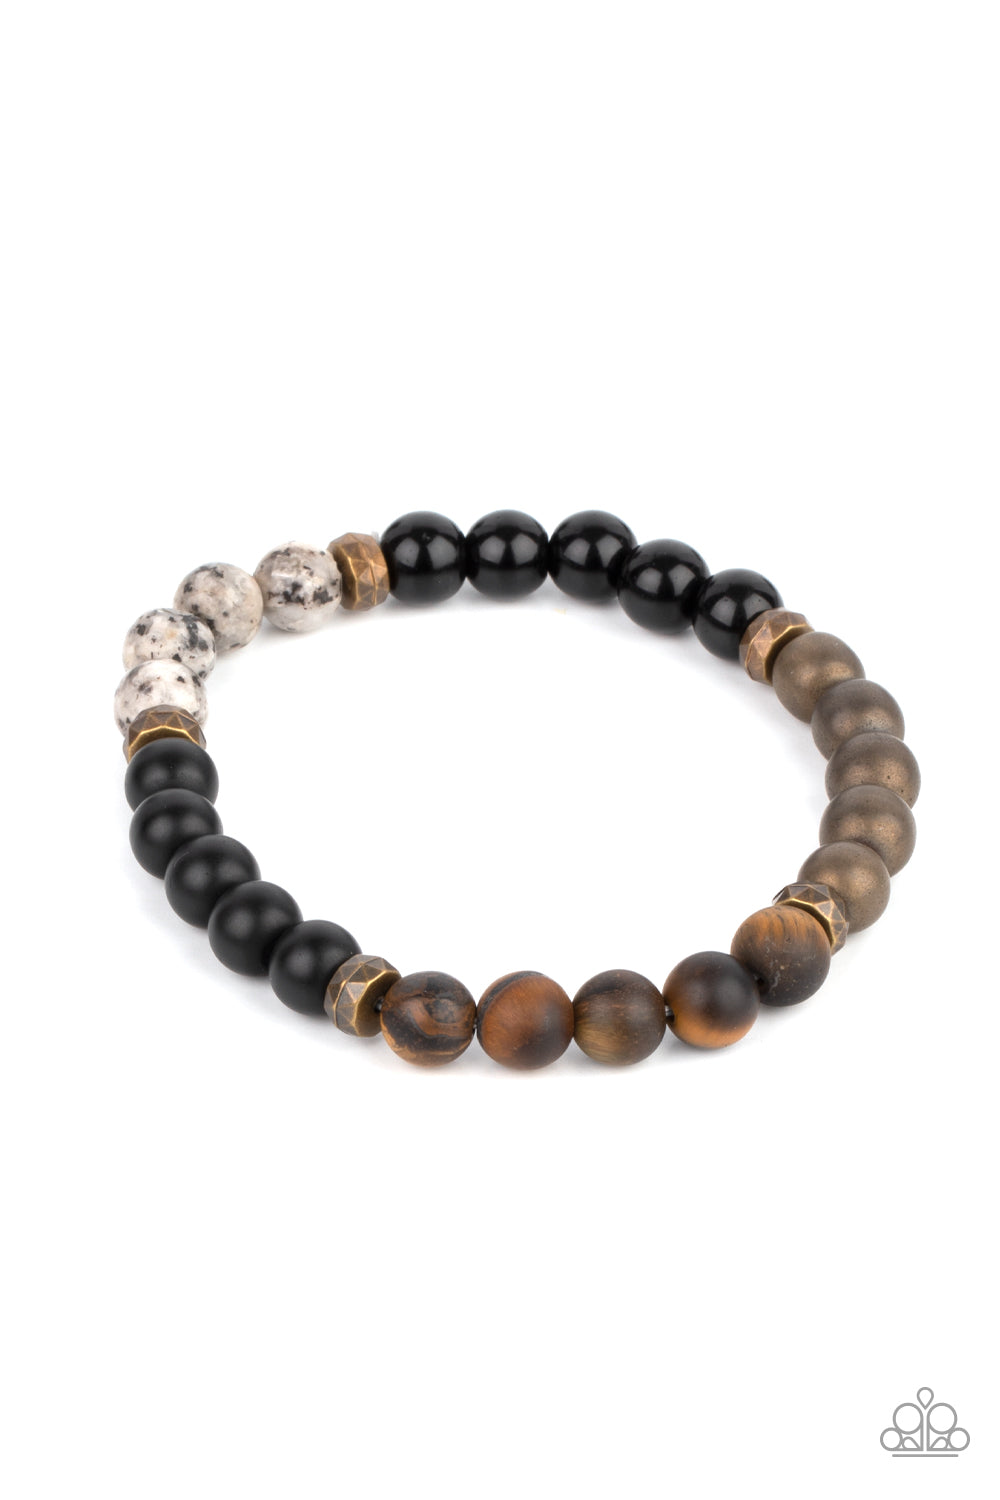 A collection of smooth round stones punctuated by faceted antiqued brass beads are threaded along a stretchy band and wrap around the wrist for an elementally earthy effect.